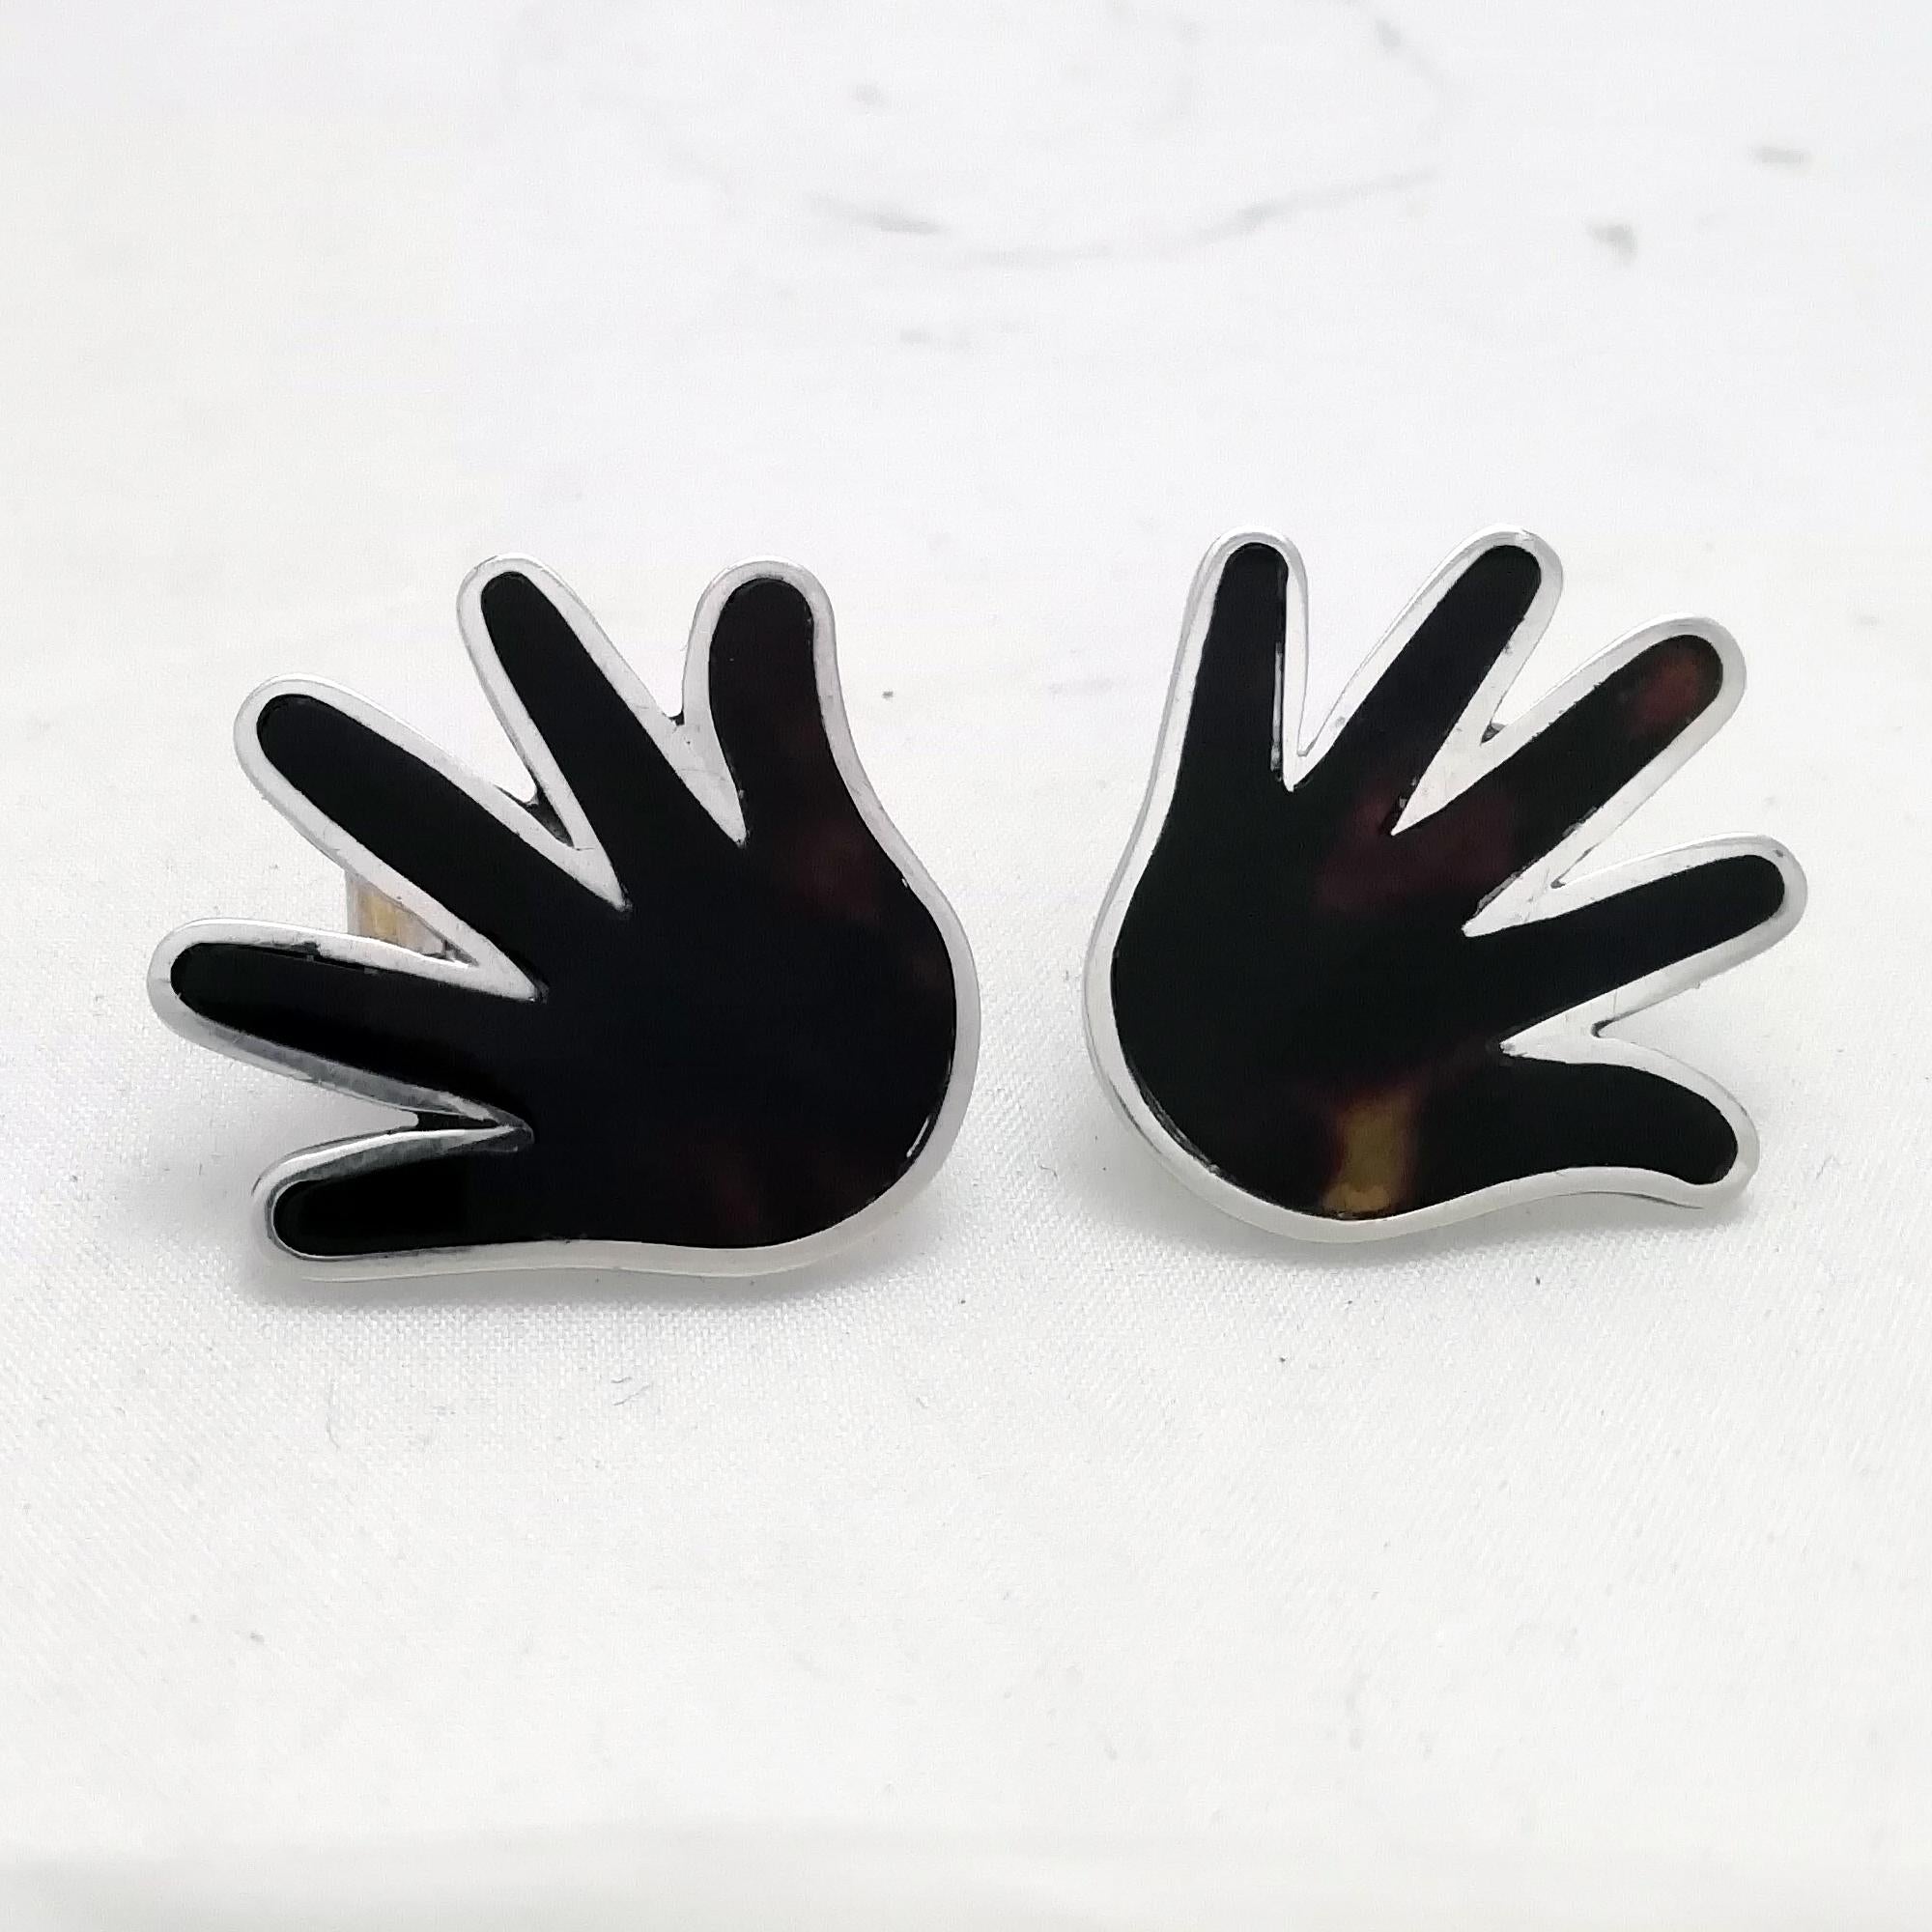 A funny pair of Sterling silver and tortoise shell earring by American designer William Spratling in shape of two palms. Made in Taxco, México, circa 1965.

Weight: 9.0 g. (0.317 oz.).